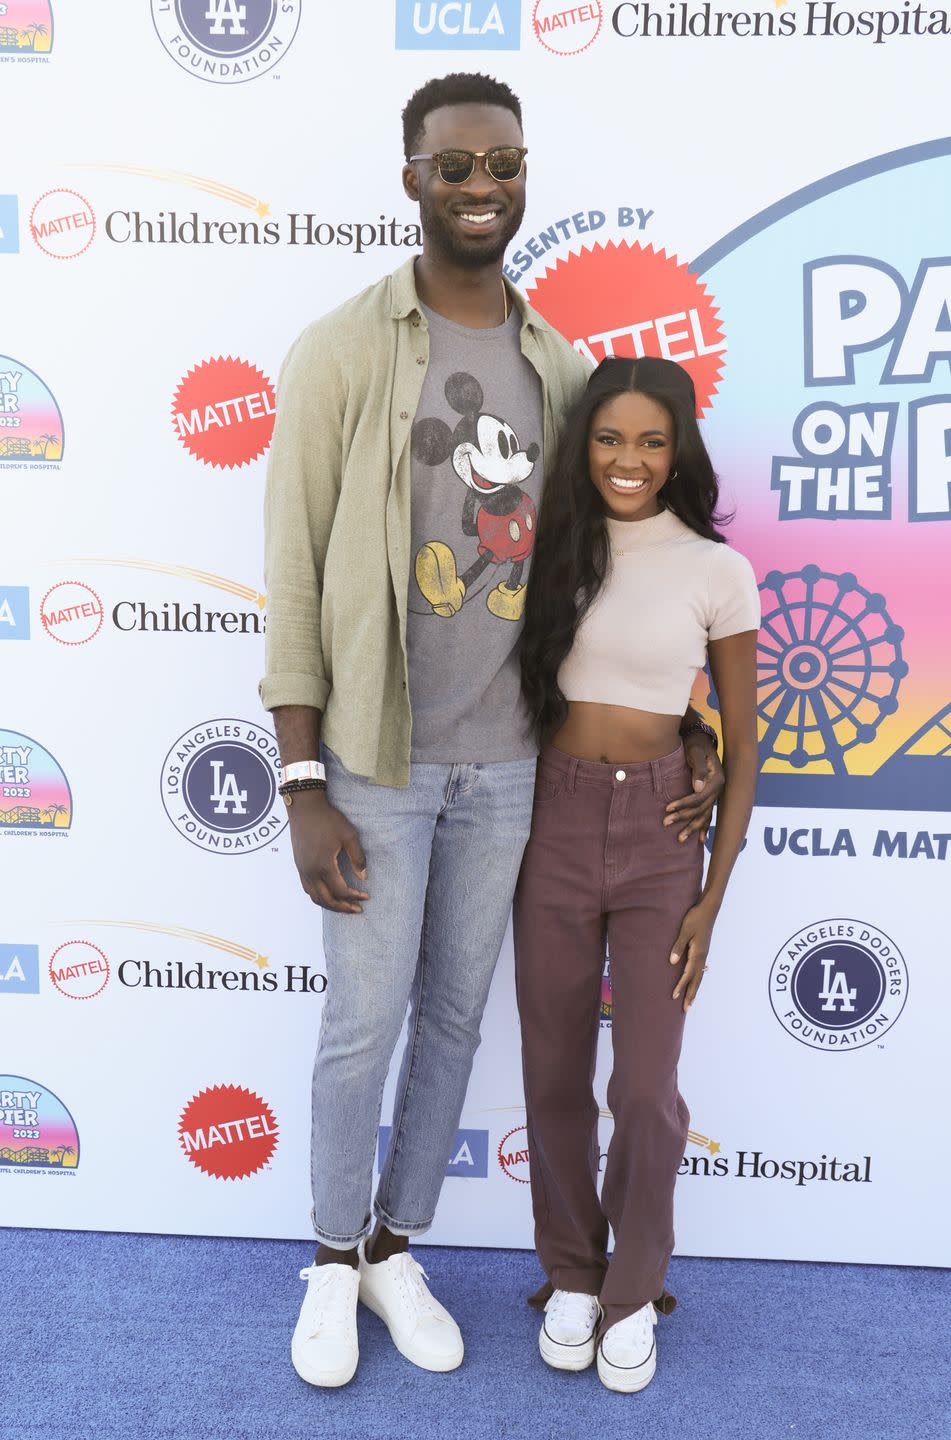 ucla mattel children's hospital's 24th annual party on the pier